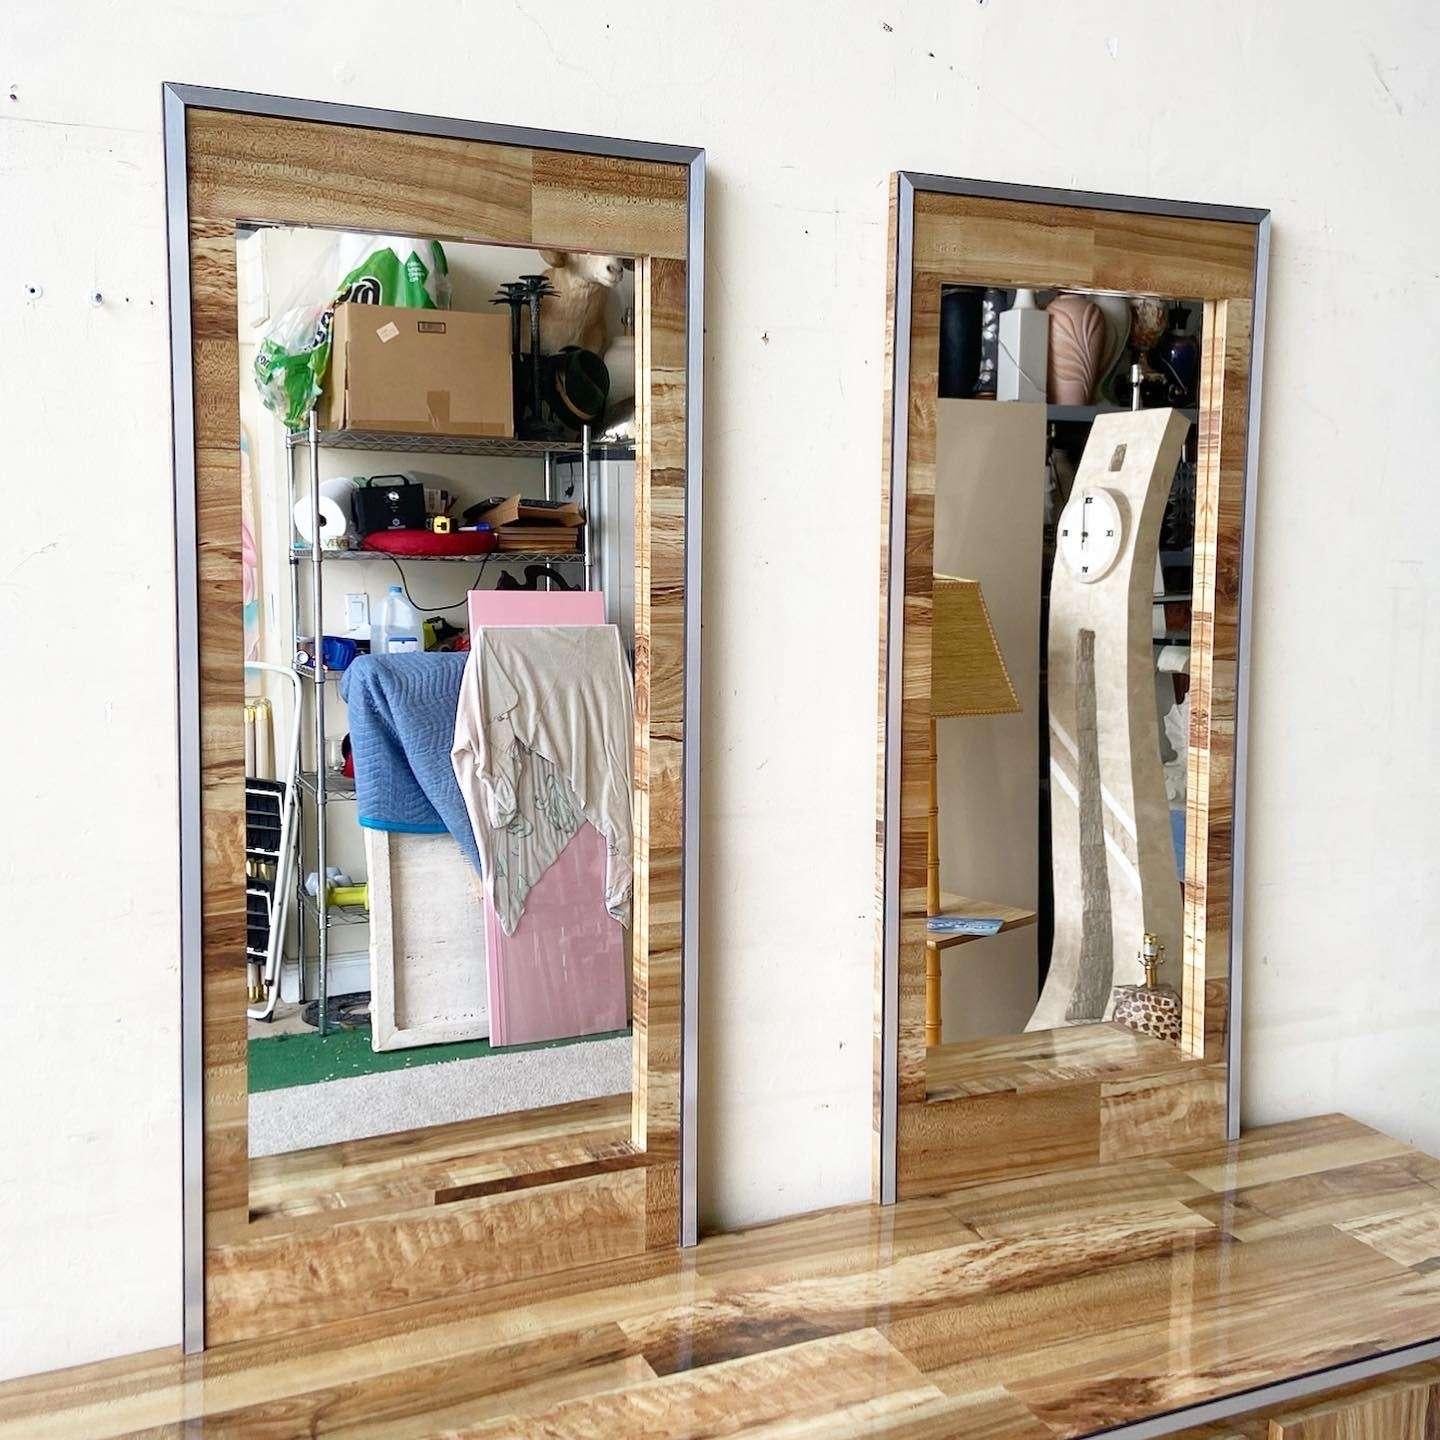 Late 20th Century Postmodern Woodgrain Laminate Dresser With Mirrors - 3 Pieces For Sale